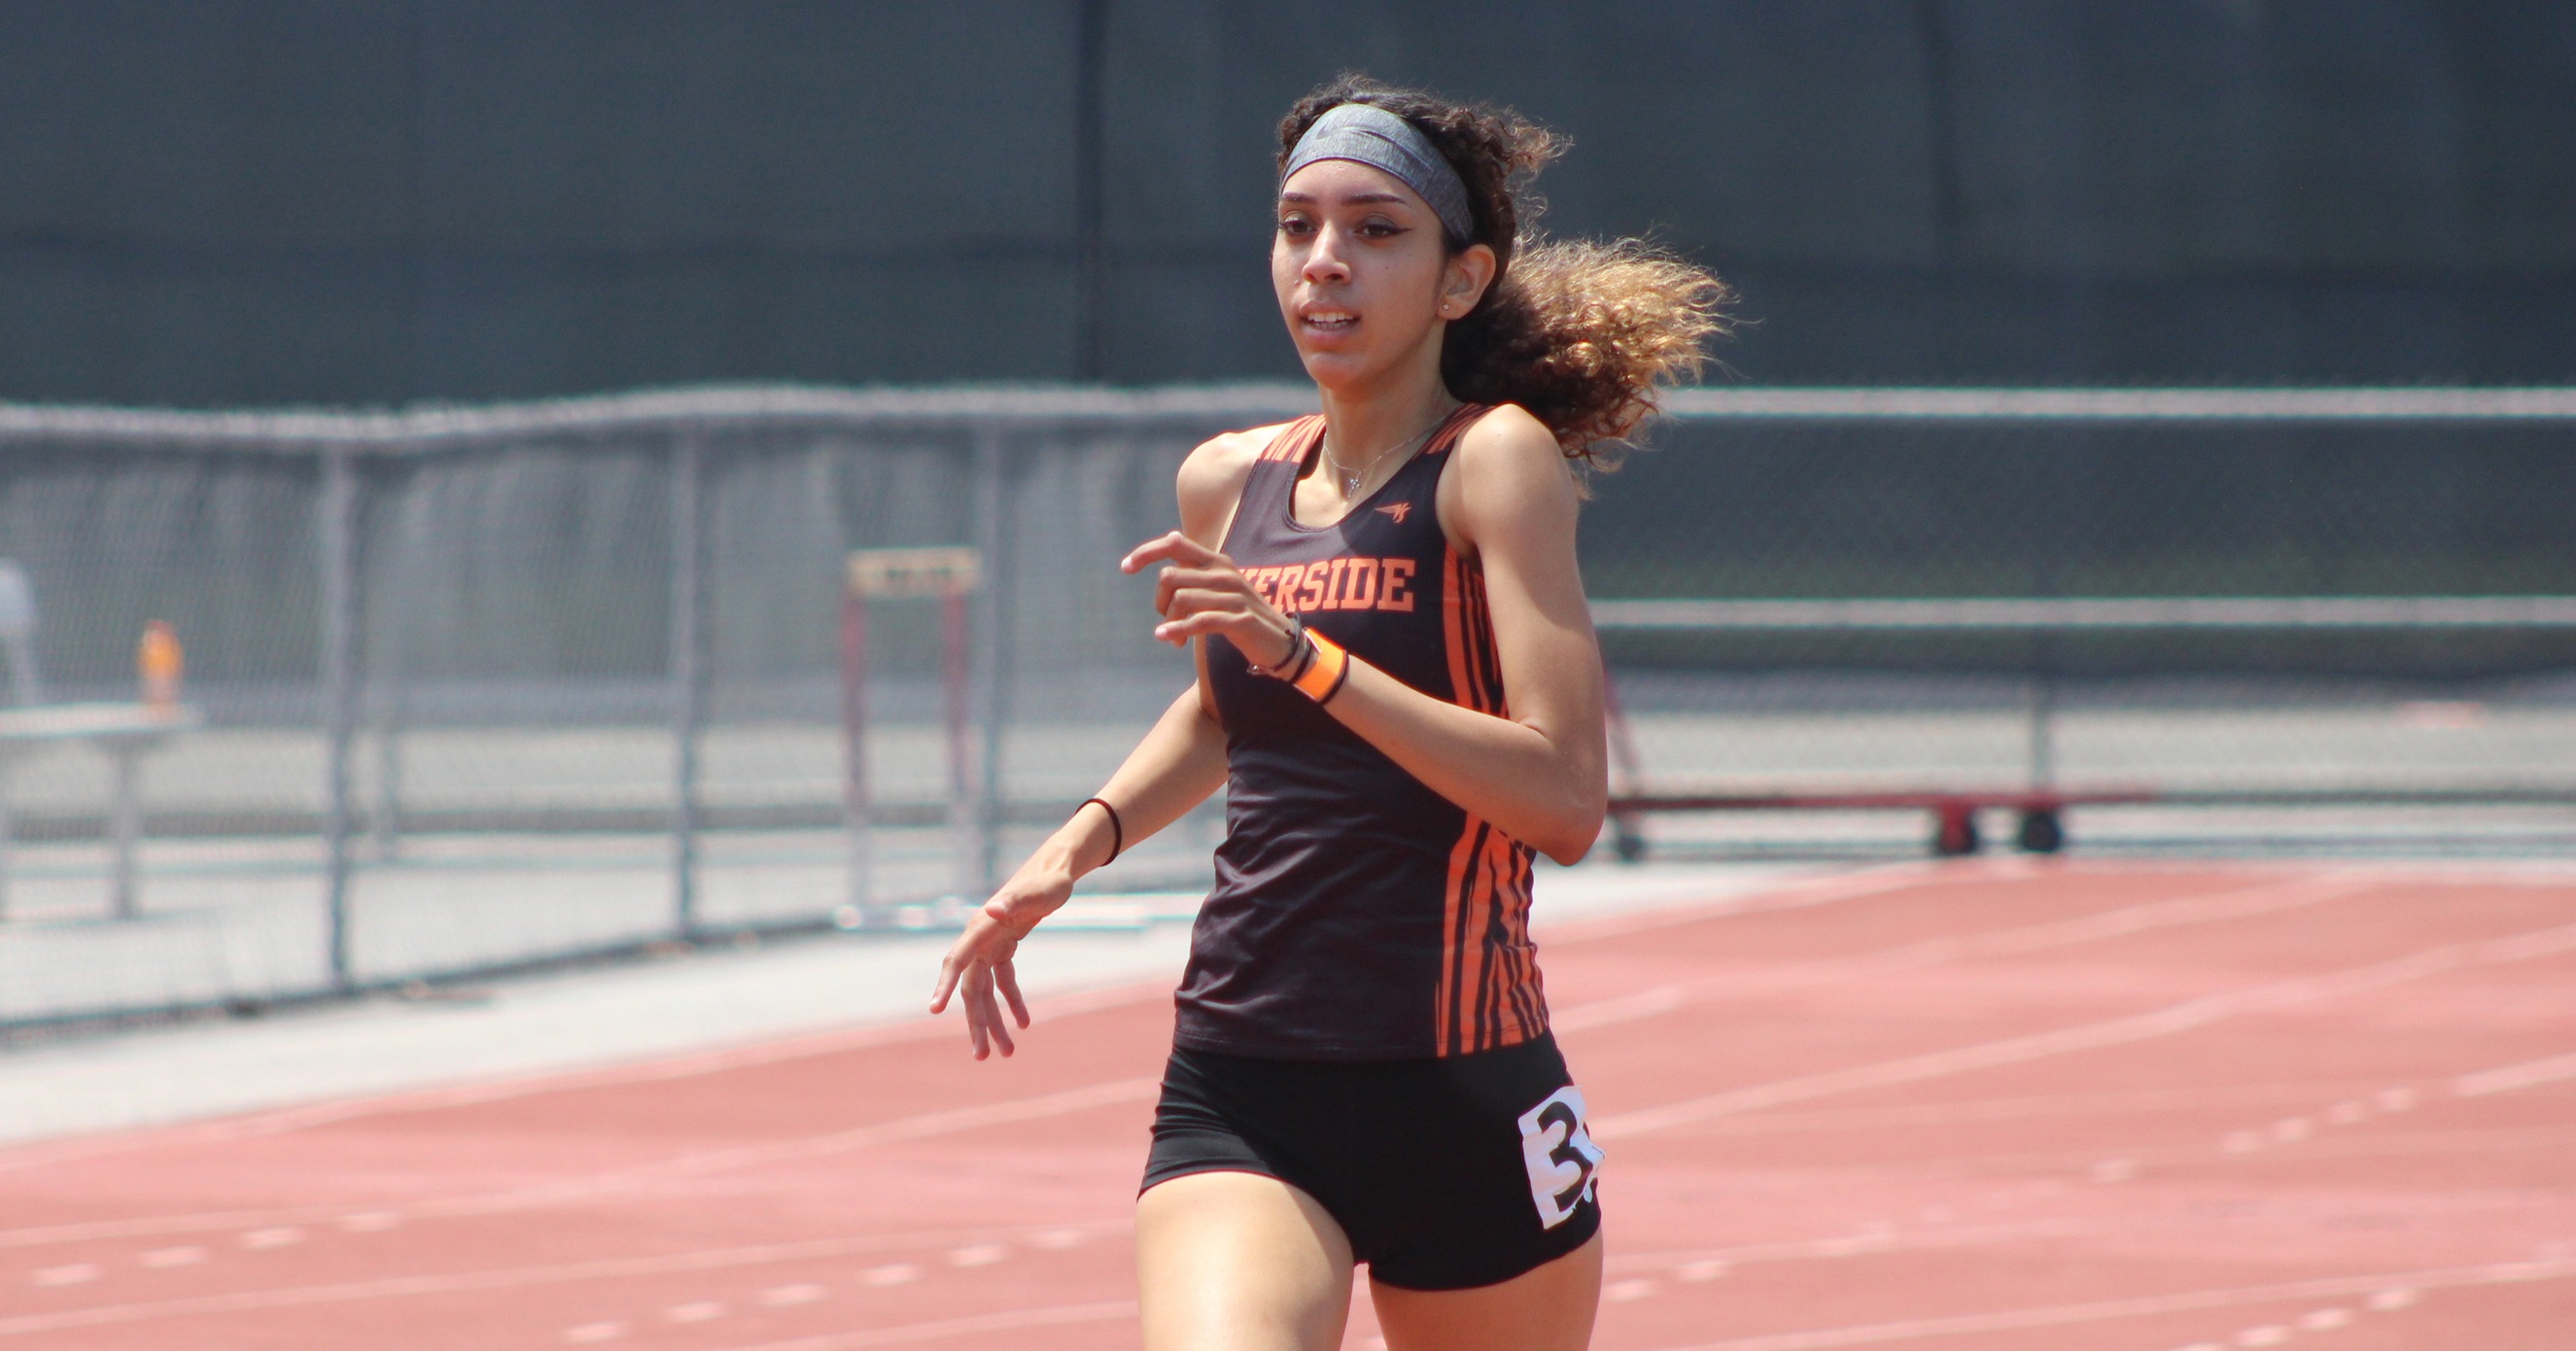 Women’s Track & Field Hauls in the Bronze at SoCal Regionals